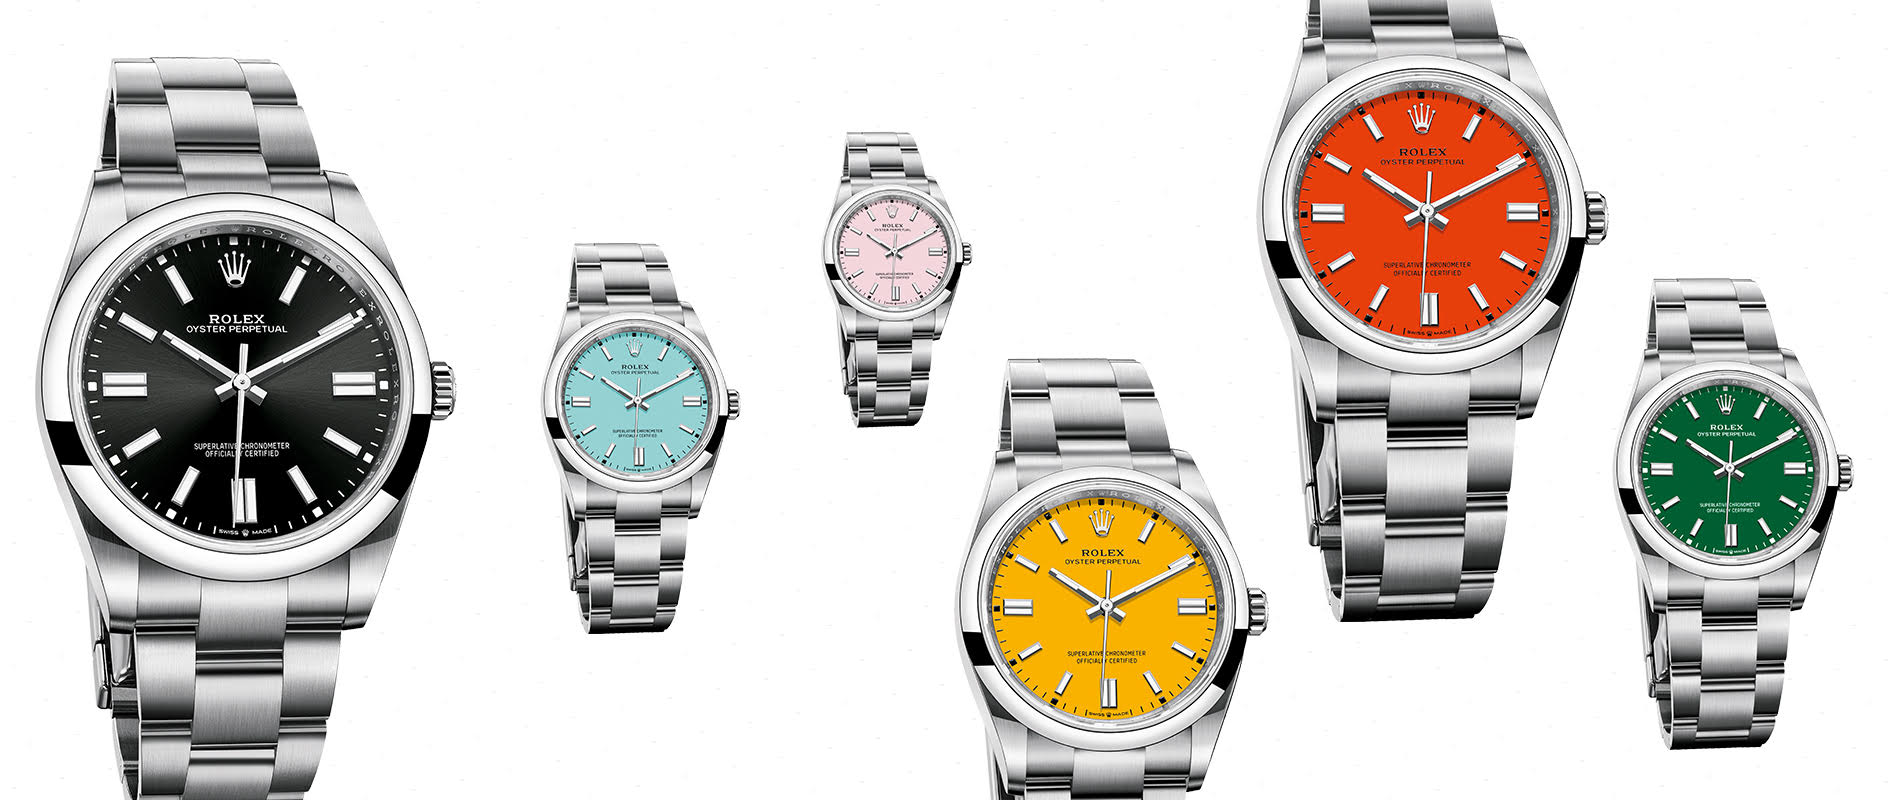 Rolex's new Oyster Perpetual watch line